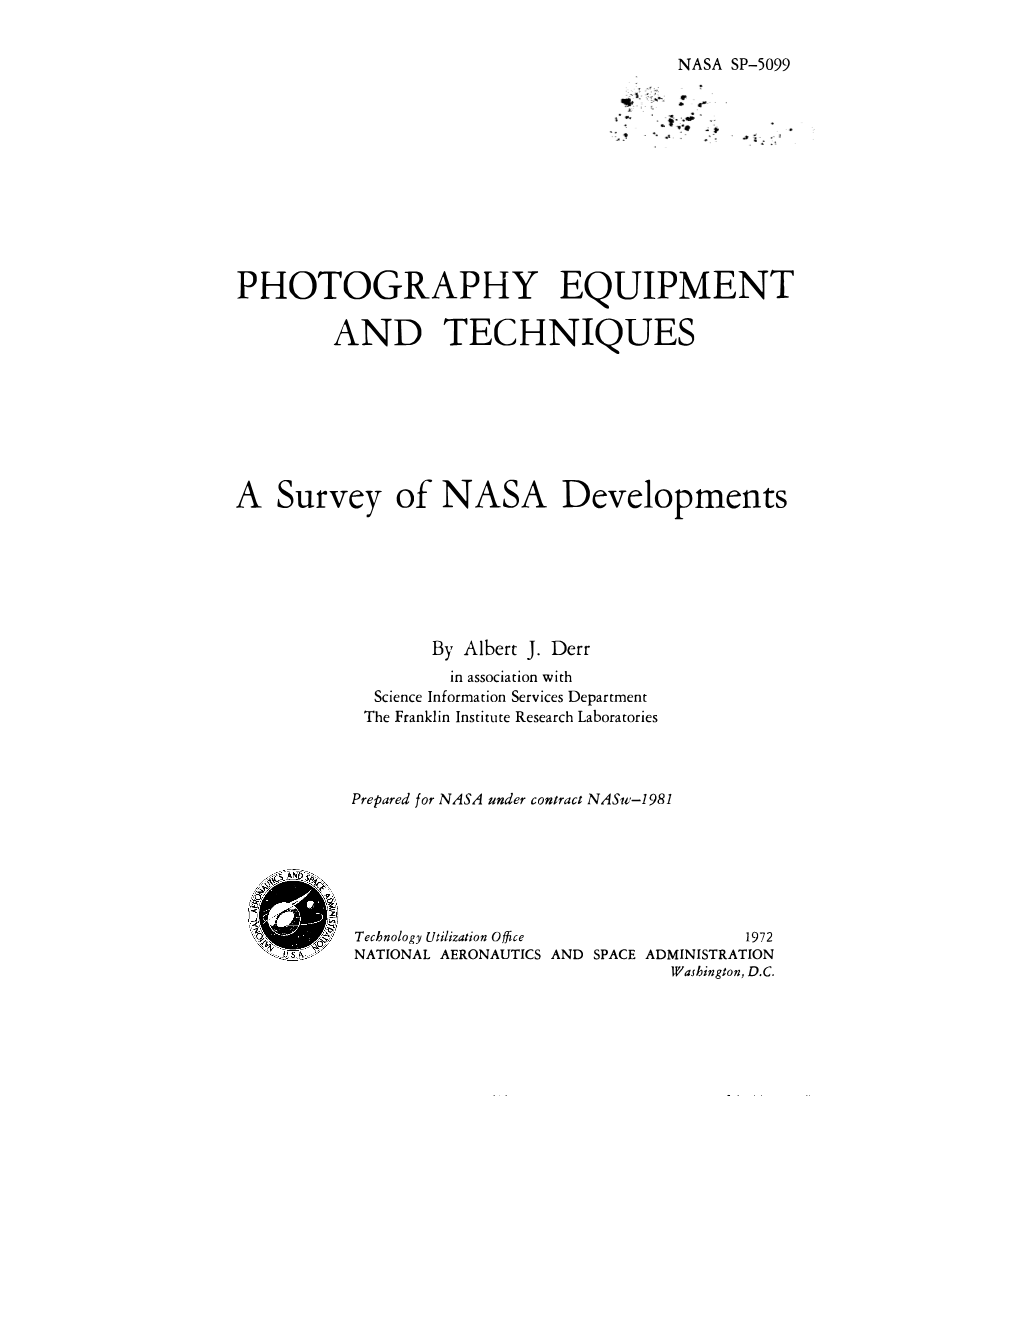 PHOTOGRAPHY EQUIPMENT and TECHNIQUES a Survey of NASA